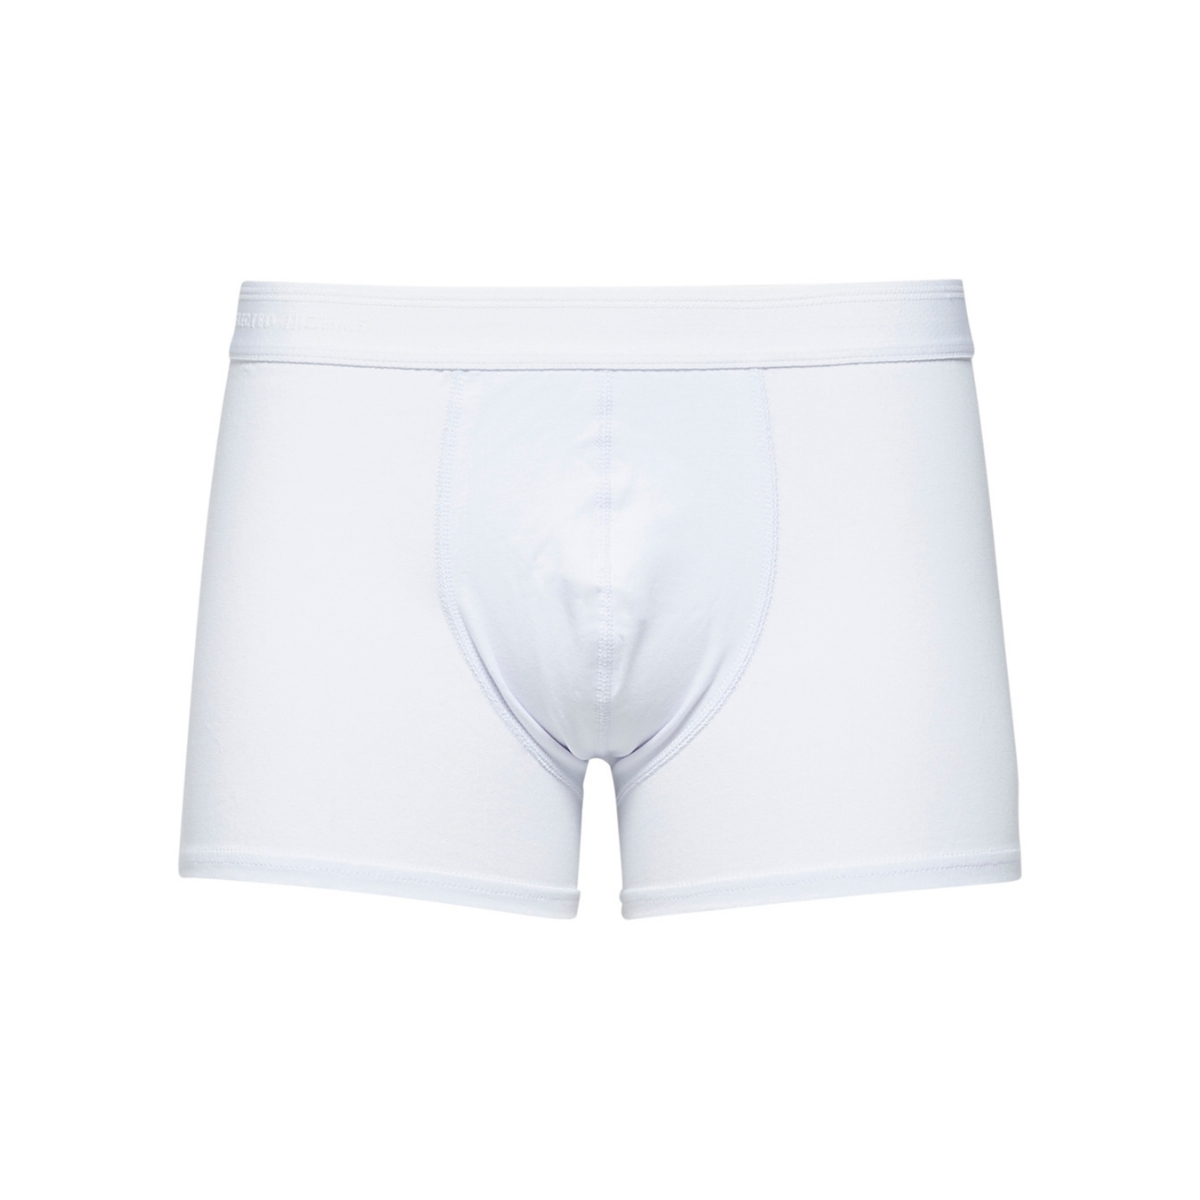 Selected Homme 1 Pack Boxer Shorts